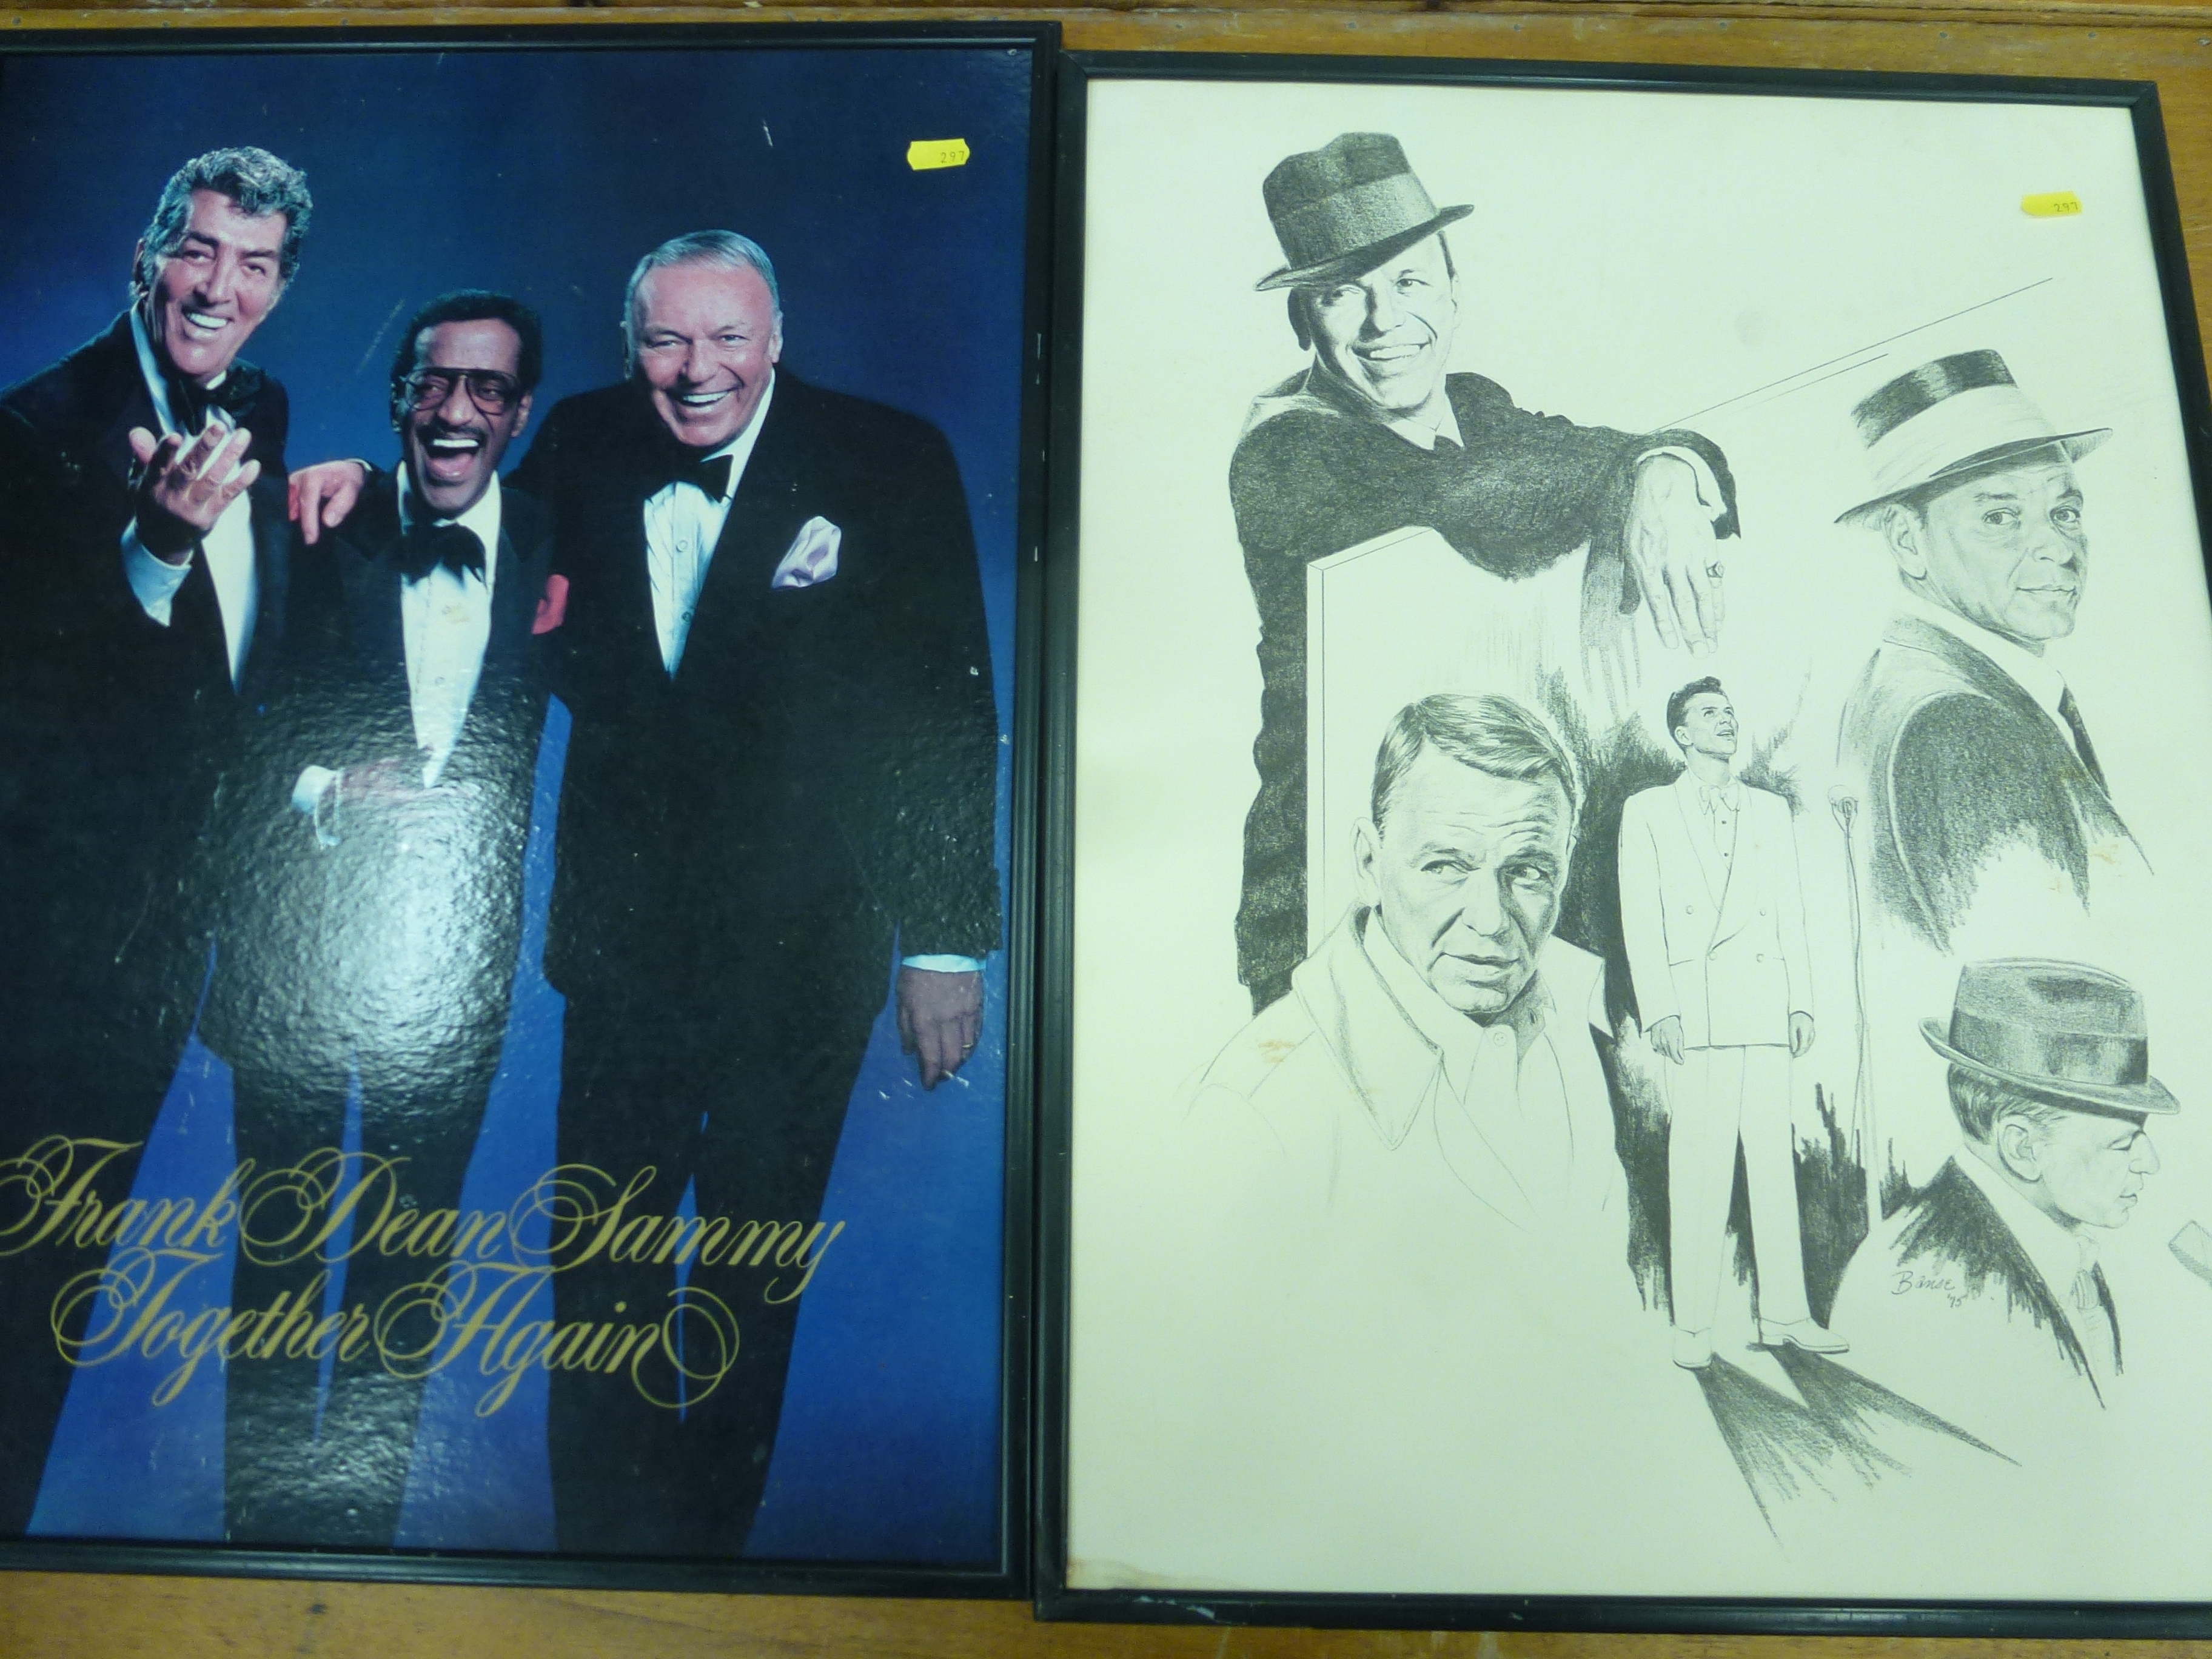 A QUANTITY OF ASSORTED PRINTED FILM POSTERS AND FRAMED SINATRA MEMORABILIA - Image 3 of 3